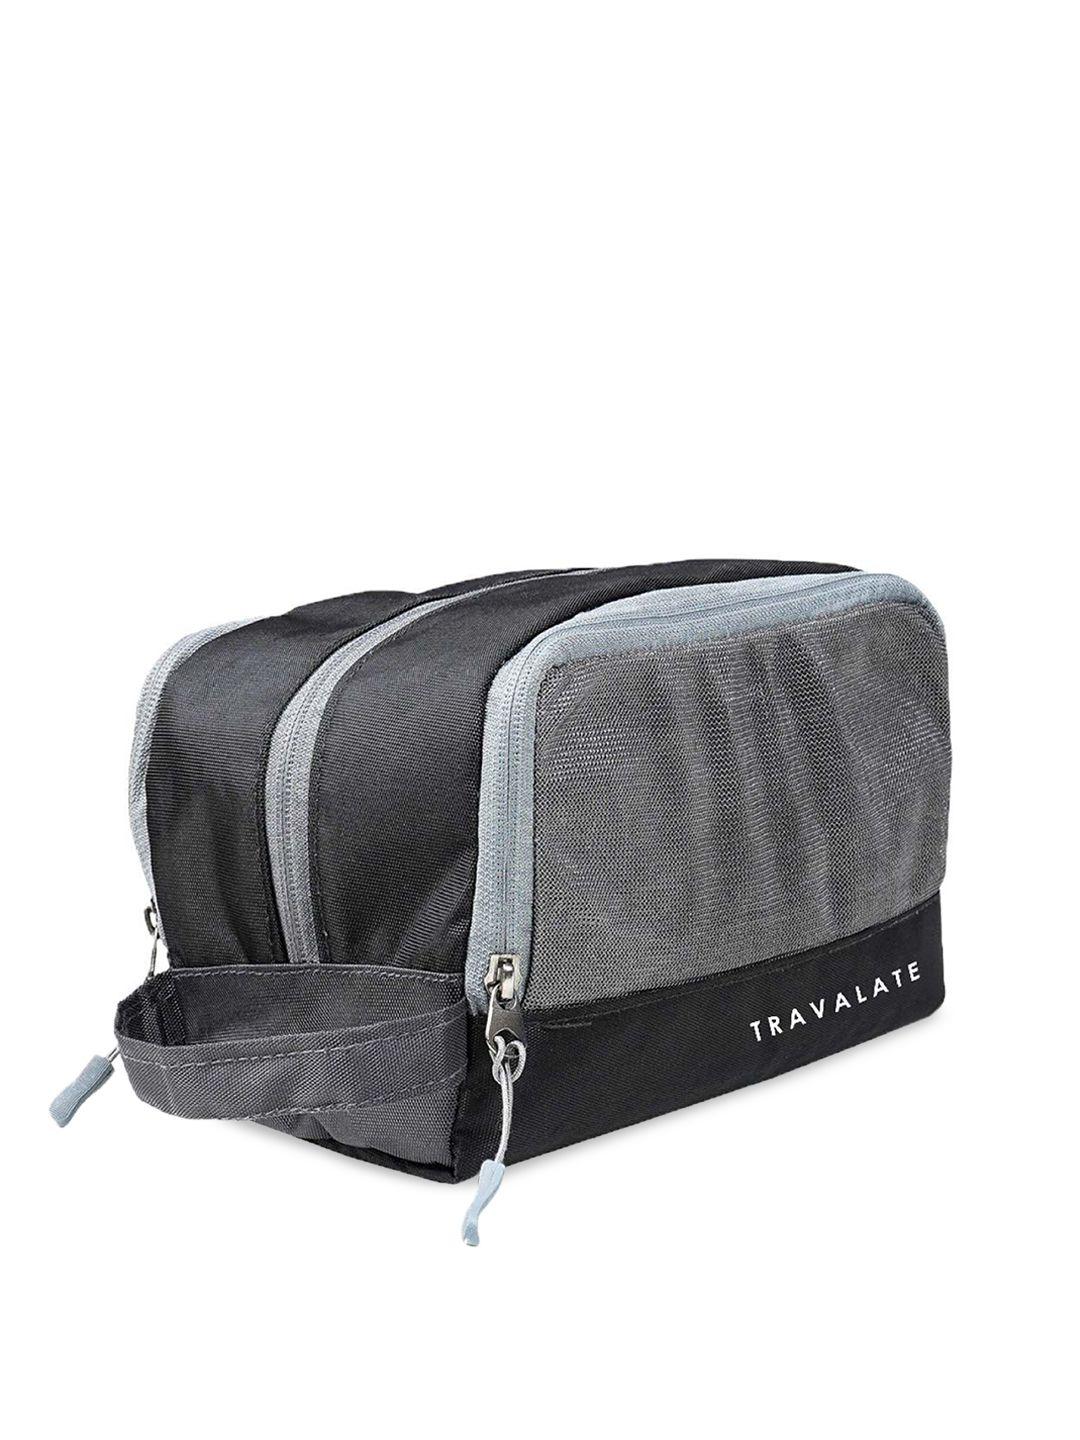 travalate adults grey polyester highly durable water resistant cosmetic travel pouch